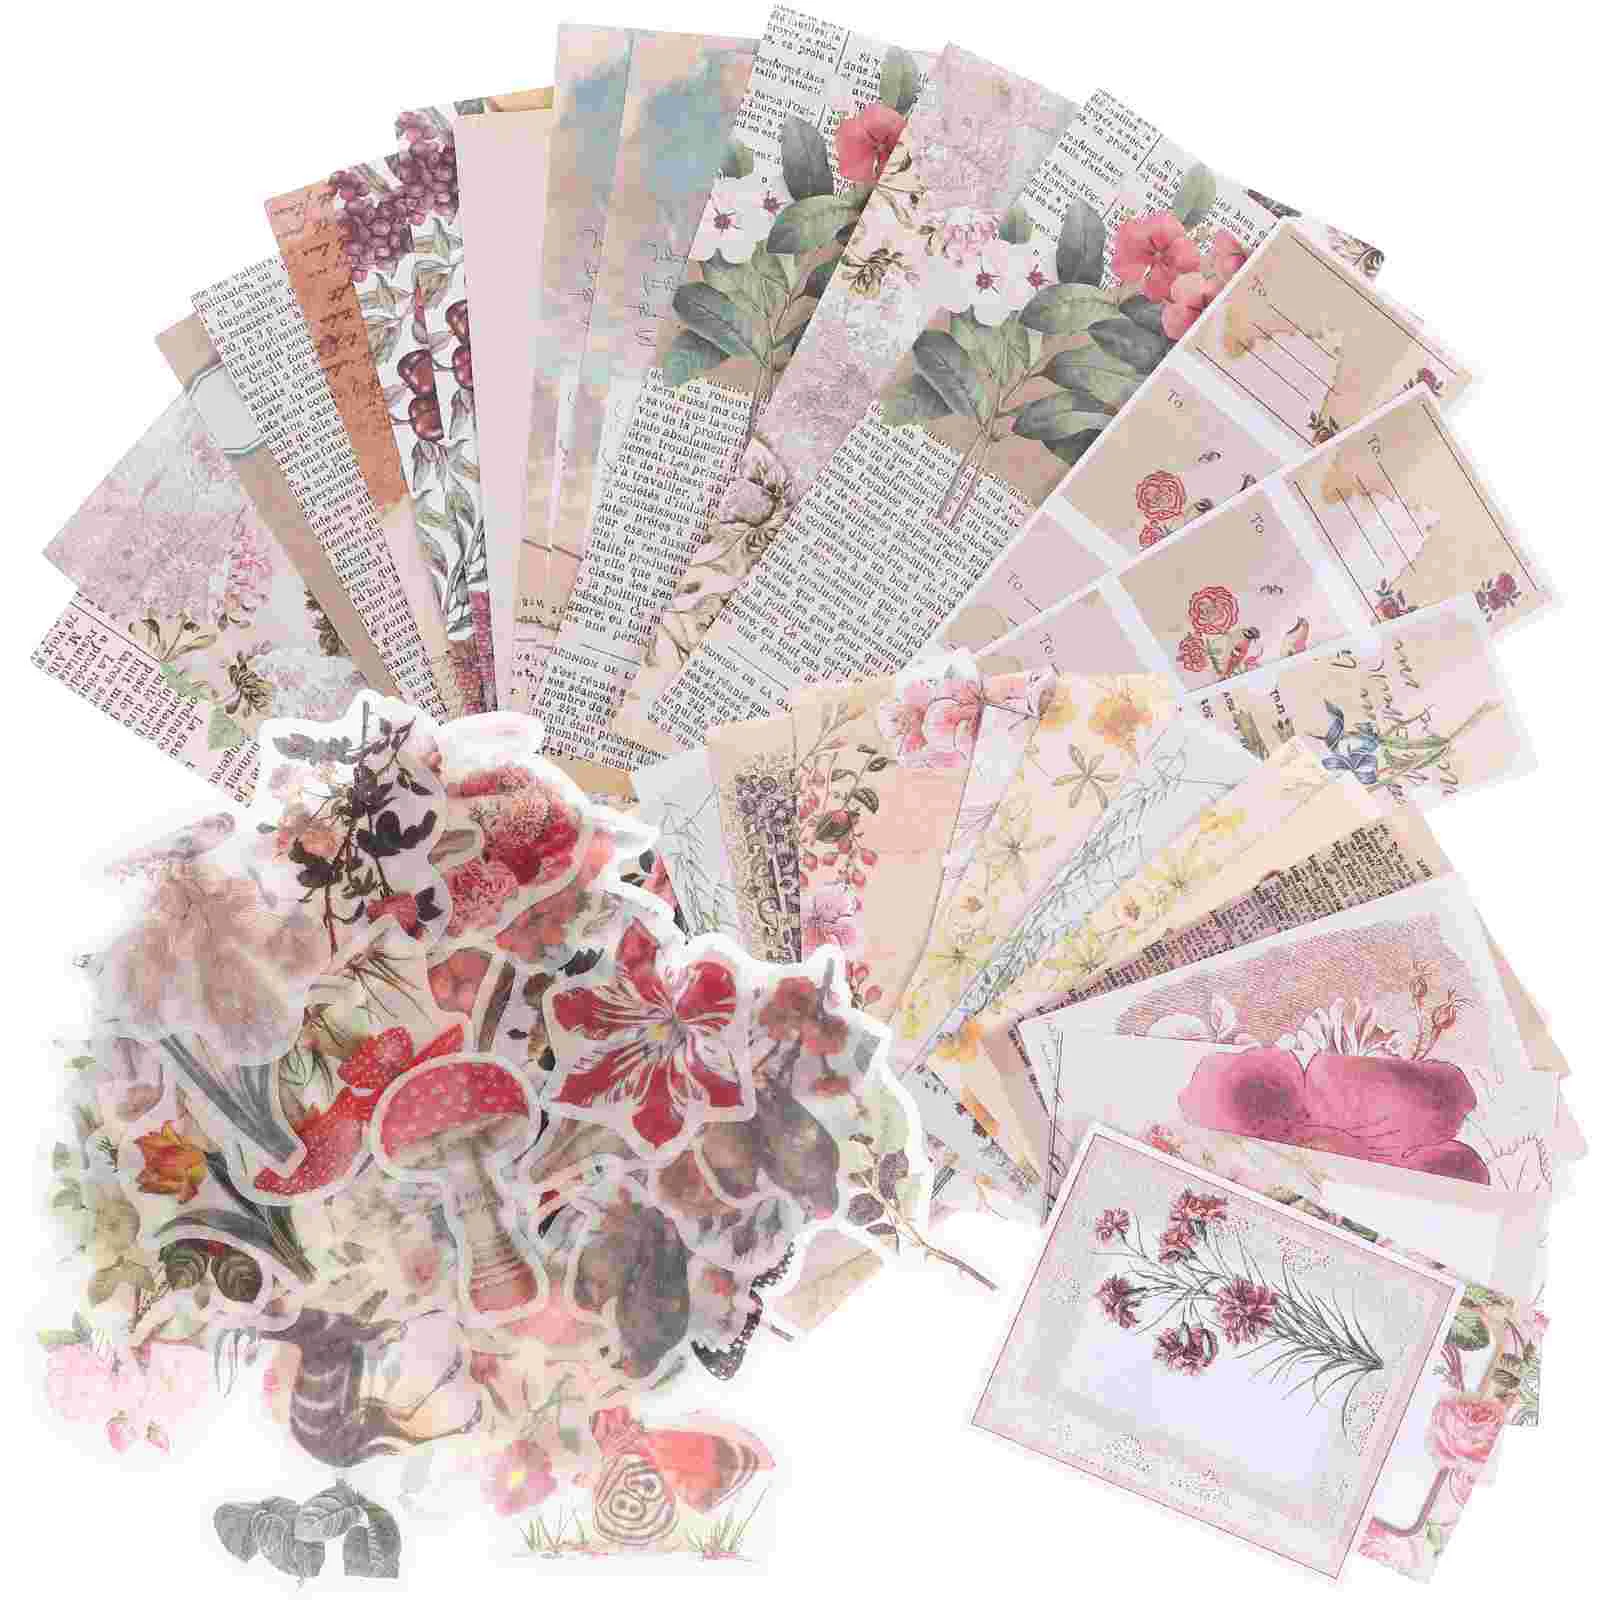 

PDA Decorative Stickers DIY Journal Material Journaling Scrapbooking Hand Account Papers Background Laptop Decals Wrapping